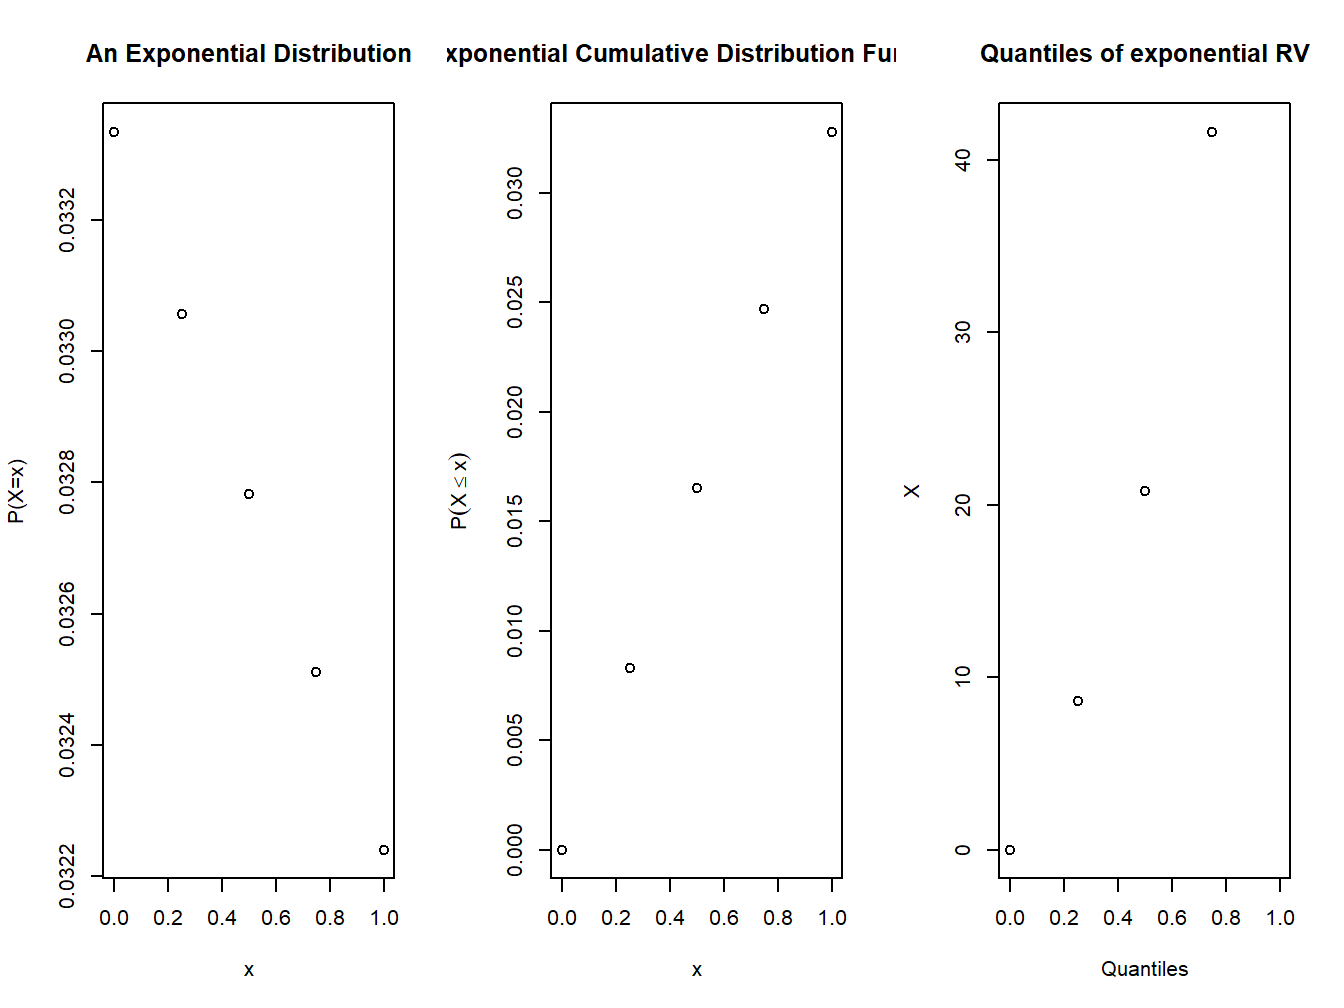 pdf and cdf of an exponential distribution